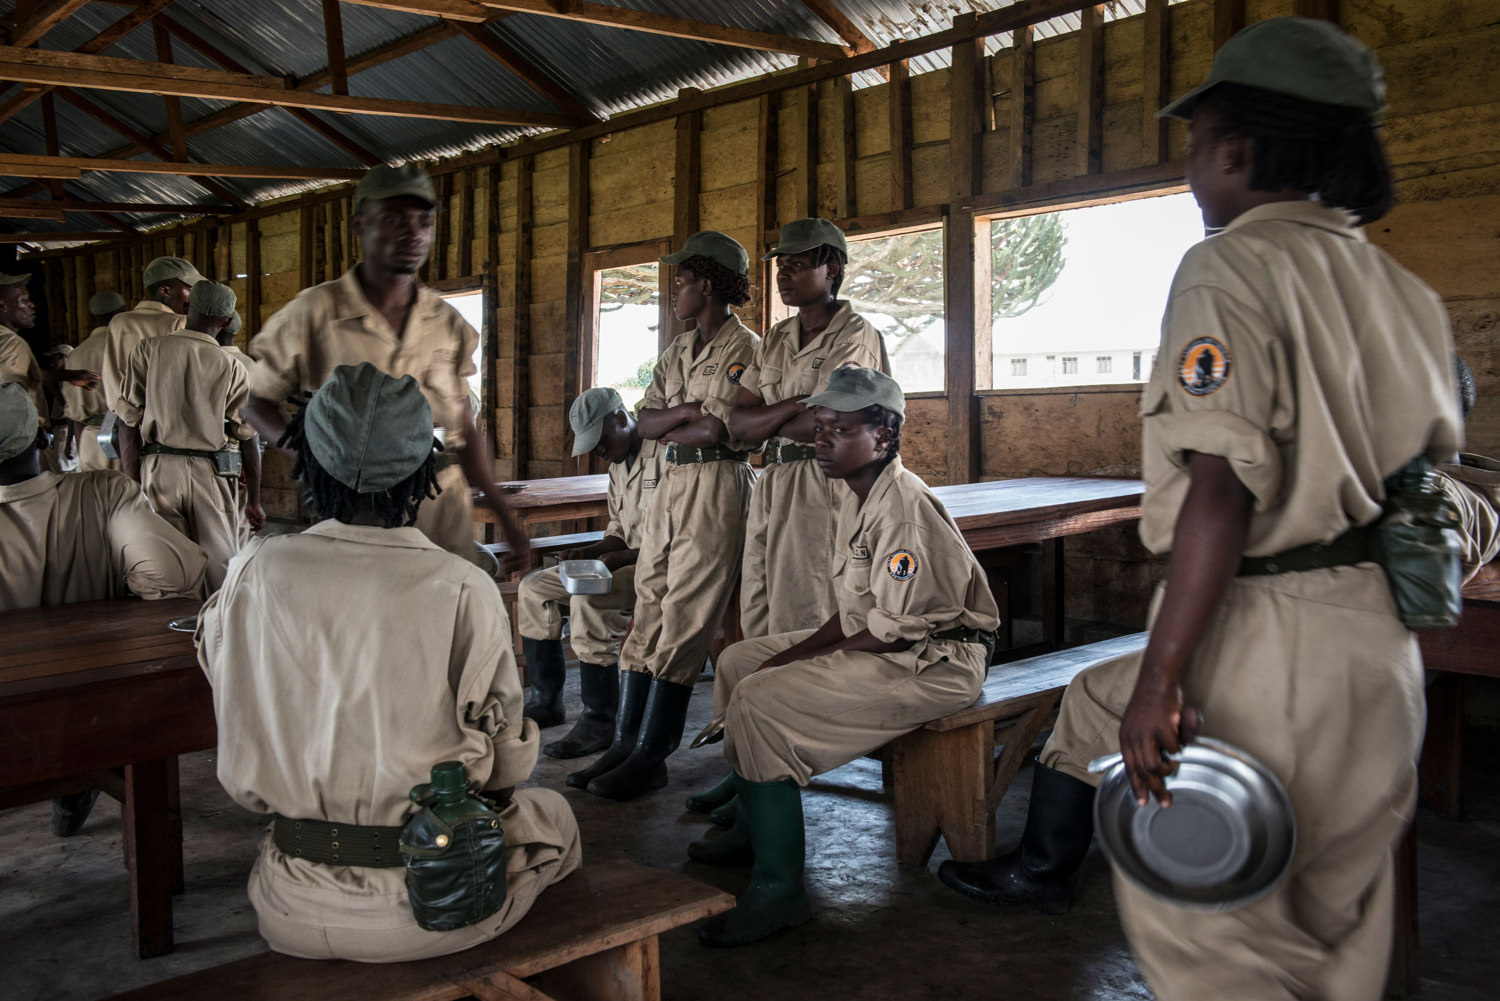  Female rangers wait before being served their meal of rice and beans, which they receive up to two times a day.
 